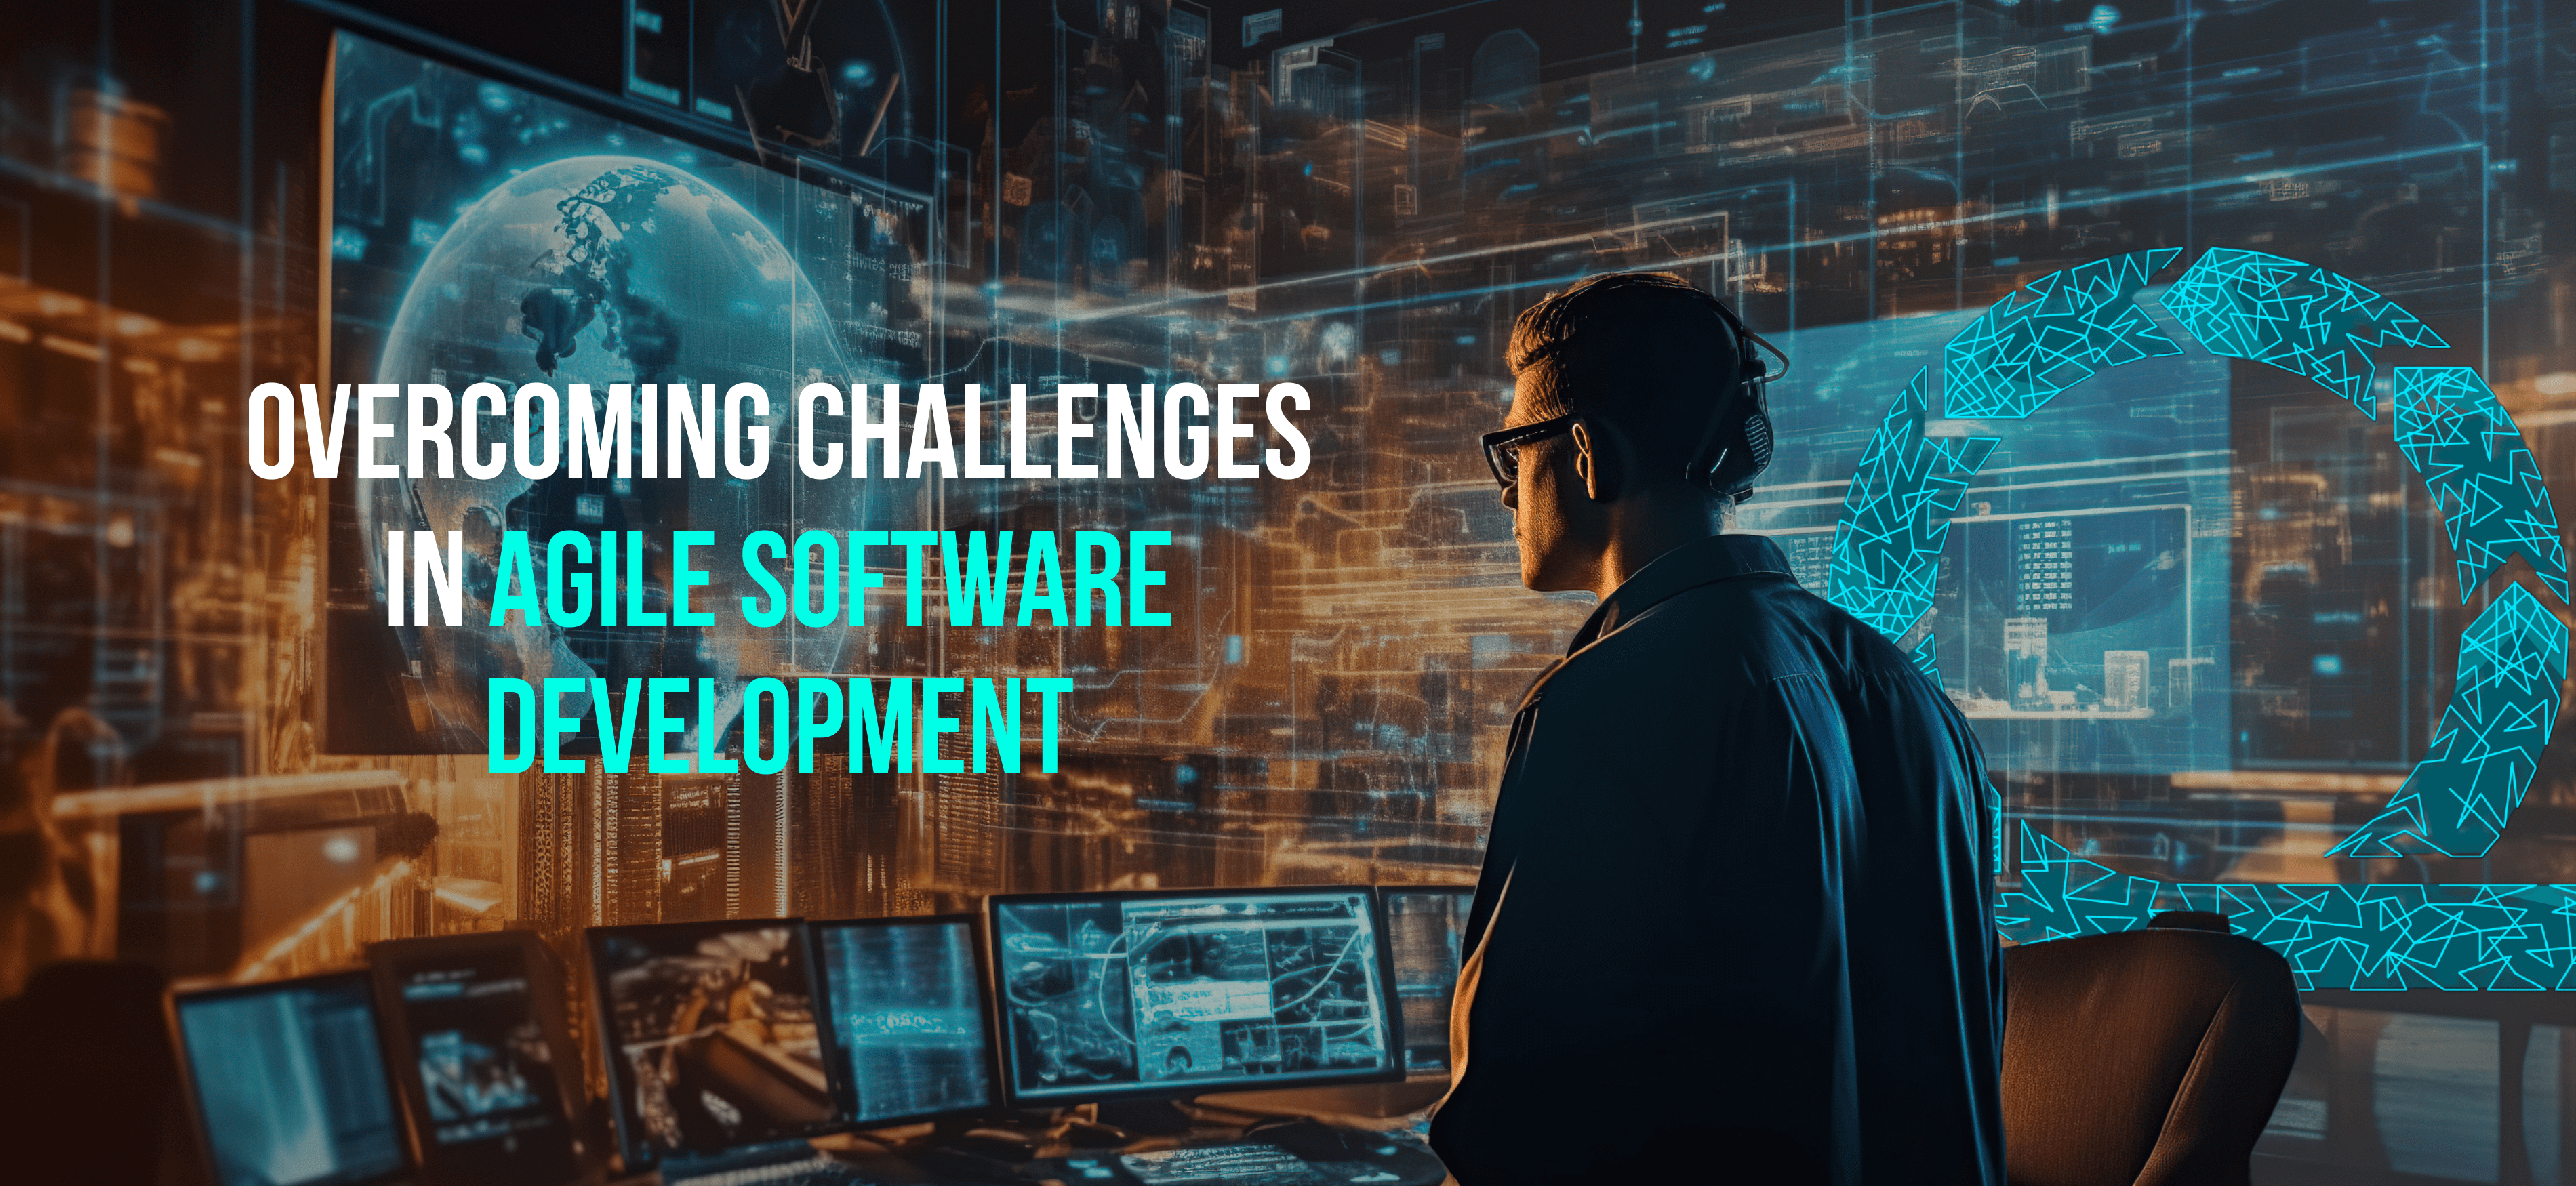 Overcoming Challenges in Agile Software Development - Internet Soft